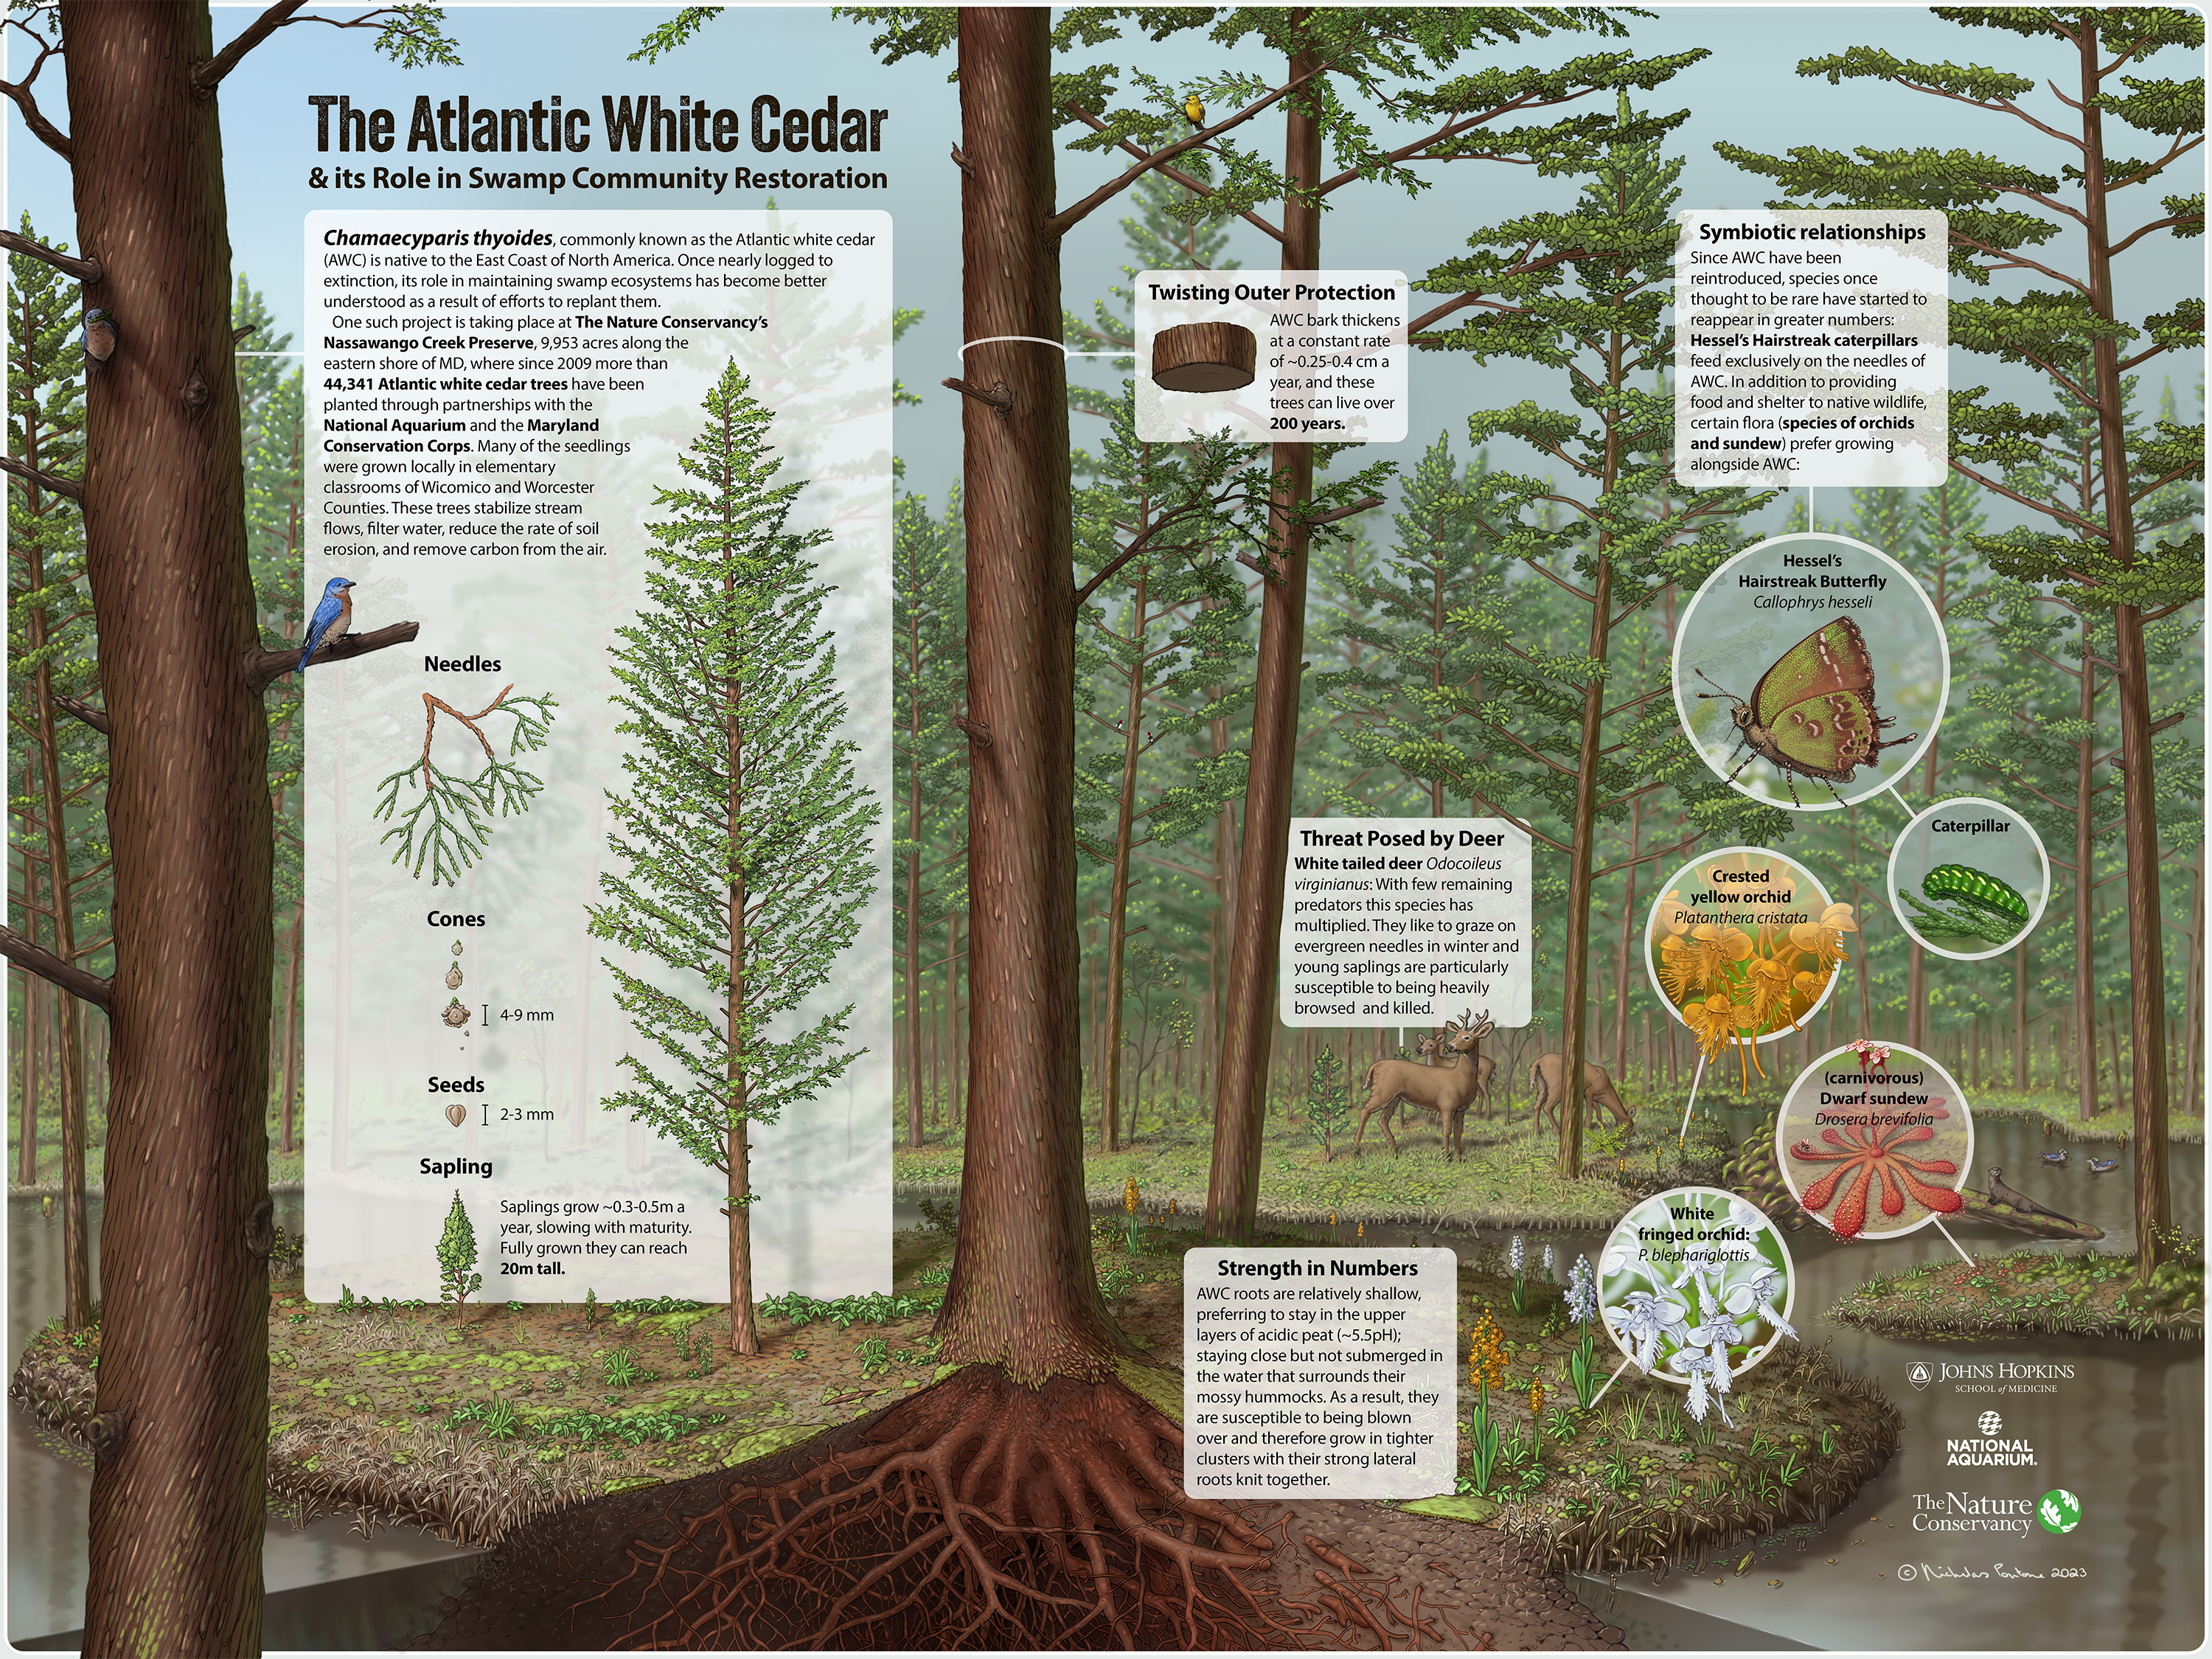 Illustrated artwork showing the ecosystem of an Atlantic white cedar forest with callouts highlighting significant species.